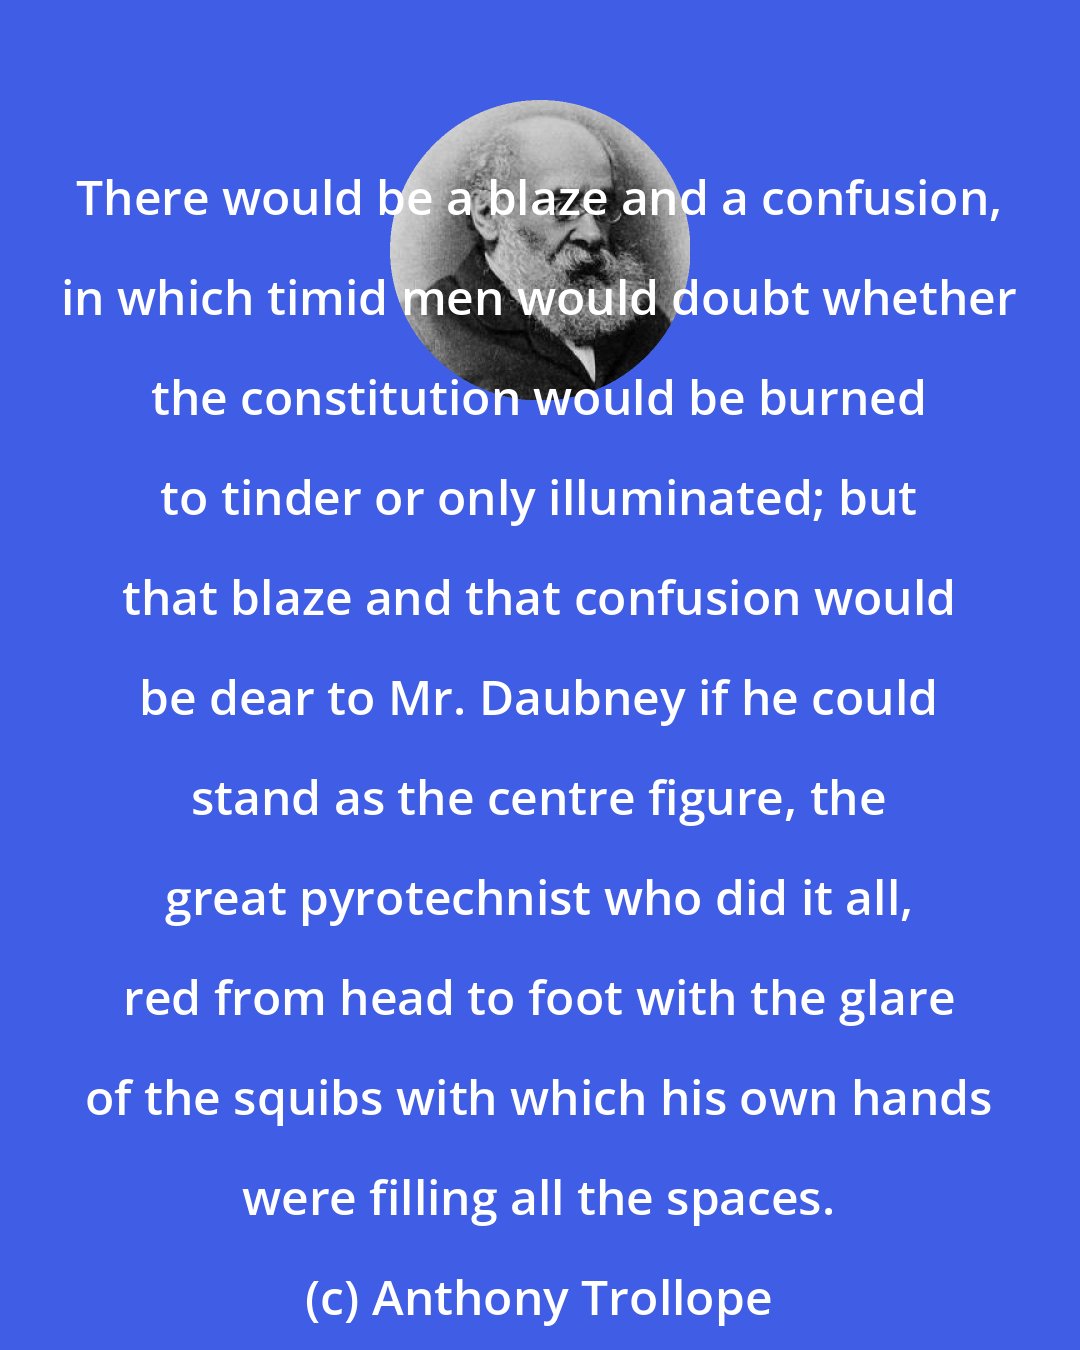 Anthony Trollope: There would be a blaze and a confusion, in which timid men would doubt whether the constitution would be burned to tinder or only illuminated; but that blaze and that confusion would be dear to Mr. Daubney if he could stand as the centre figure, the great pyrotechnist who did it all, red from head to foot with the glare of the squibs with which his own hands were filling all the spaces.